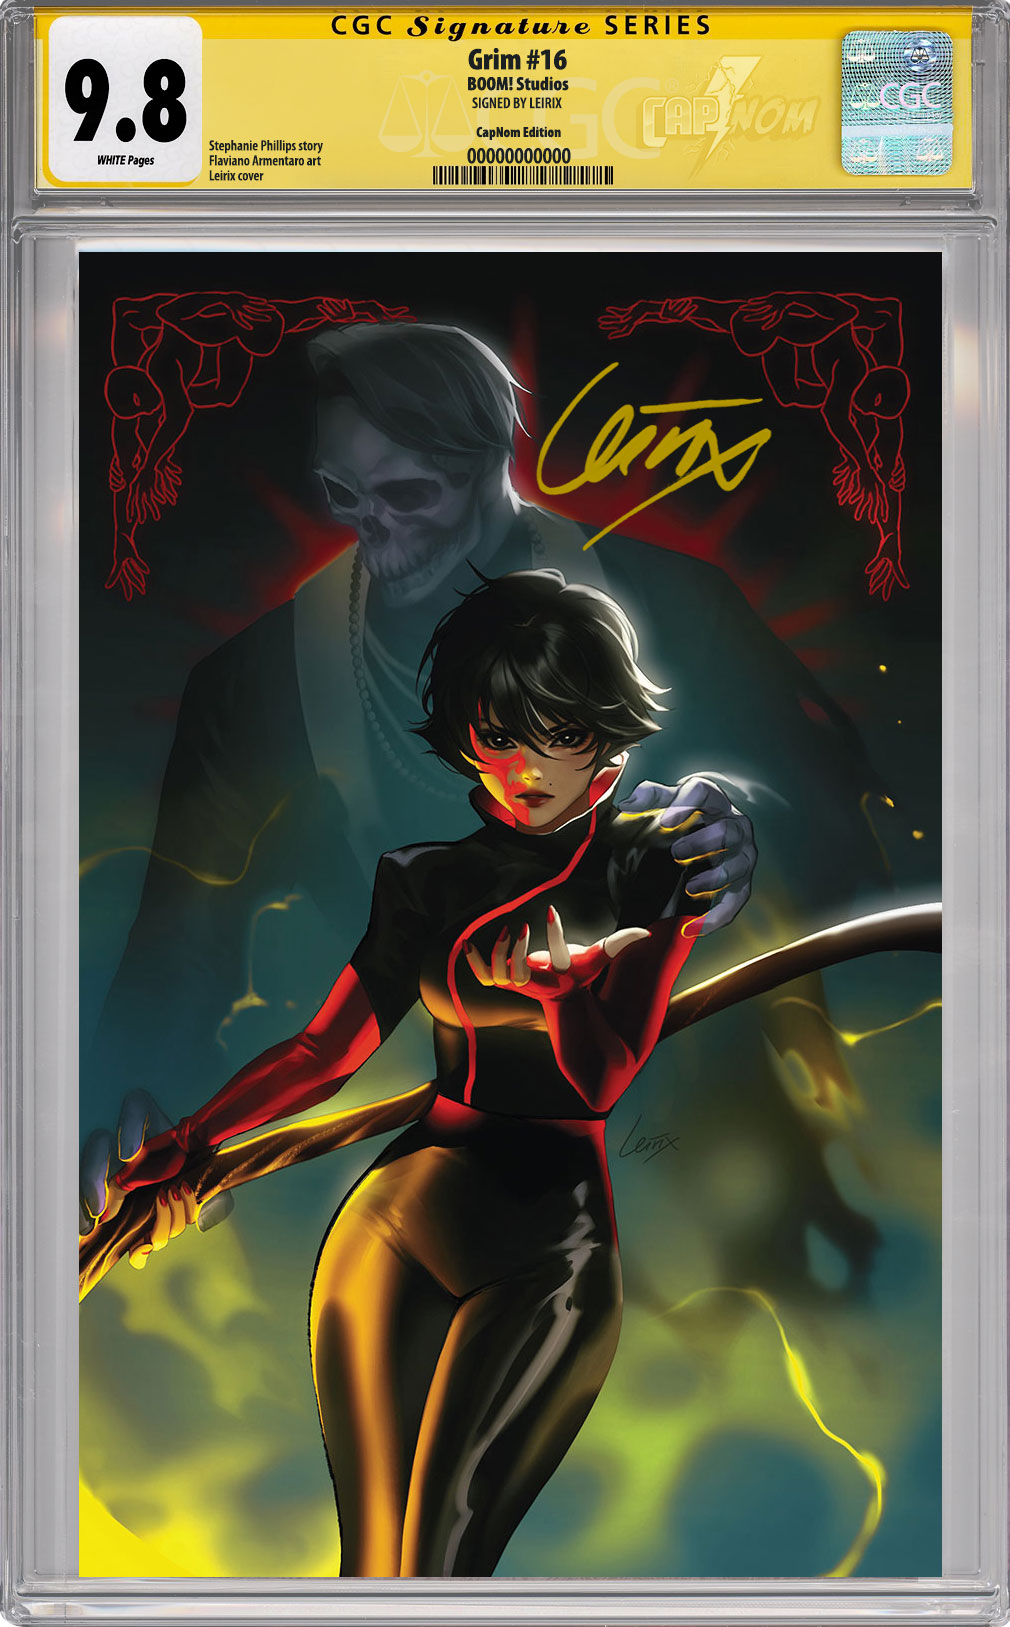 GRIM #16 C2E2 Exclusive Virgin Cover "DEATH TOUCH" CGC SS 9.8 SIGNED by LEIRIX